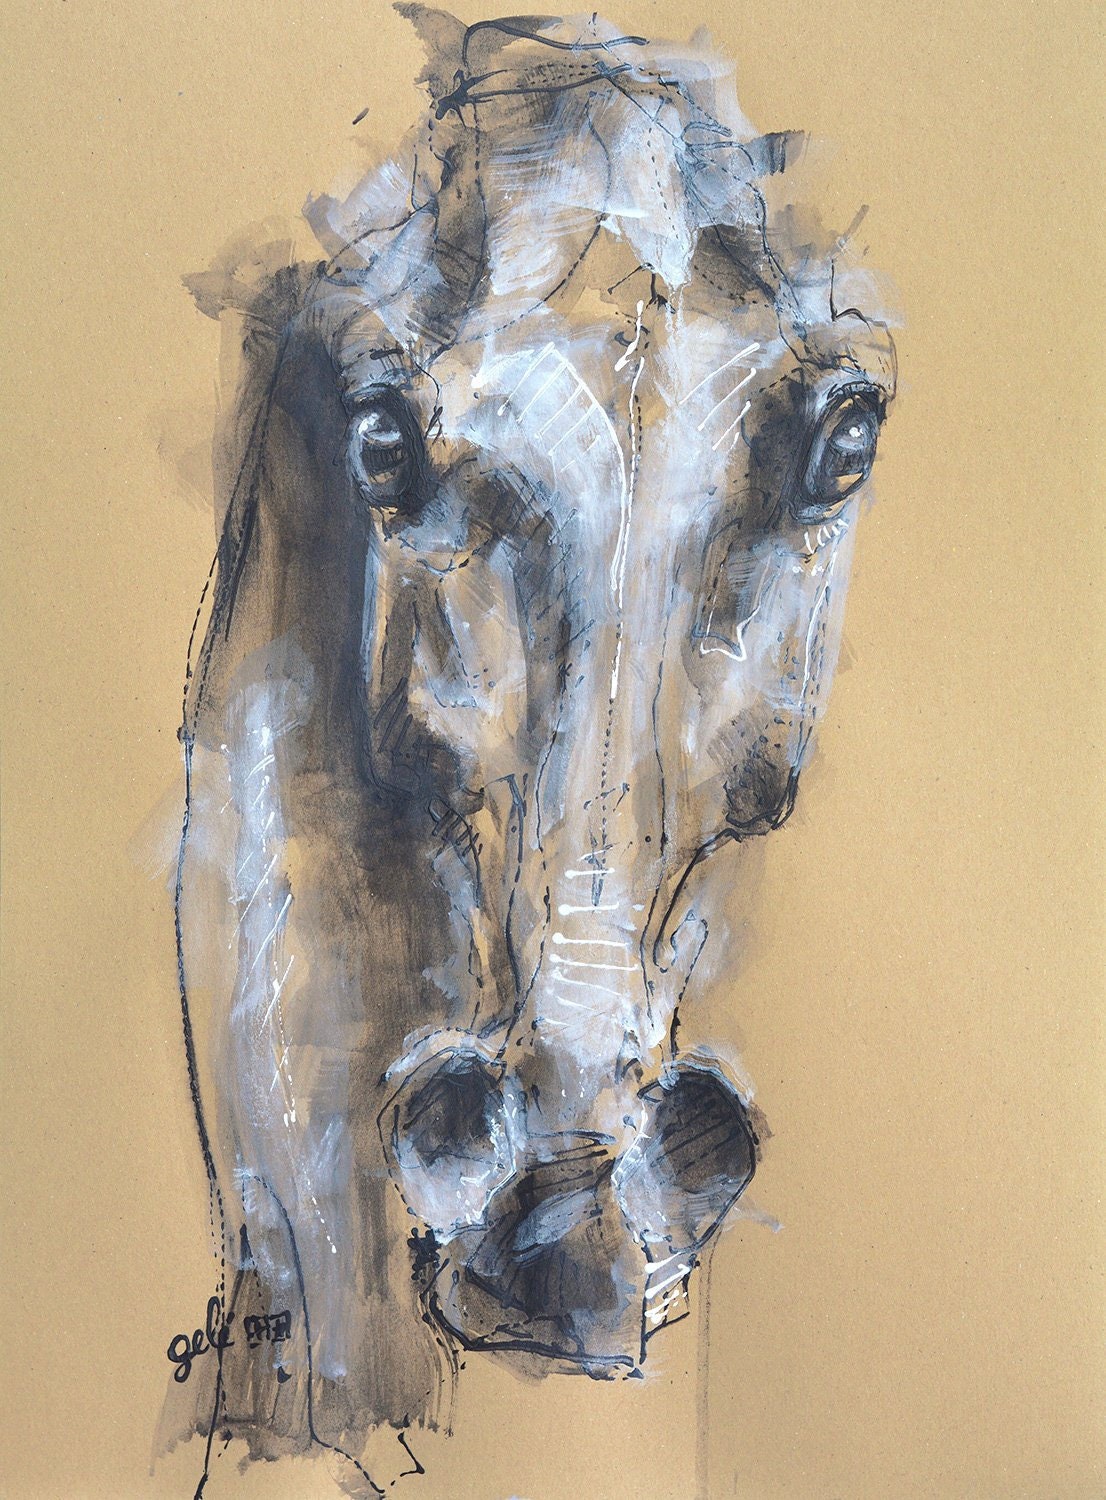 Original Acrylic, Ink and Pen Painting of a Horse in Motion, Modern Art,  Expressive Animal Art, Equine Artist 